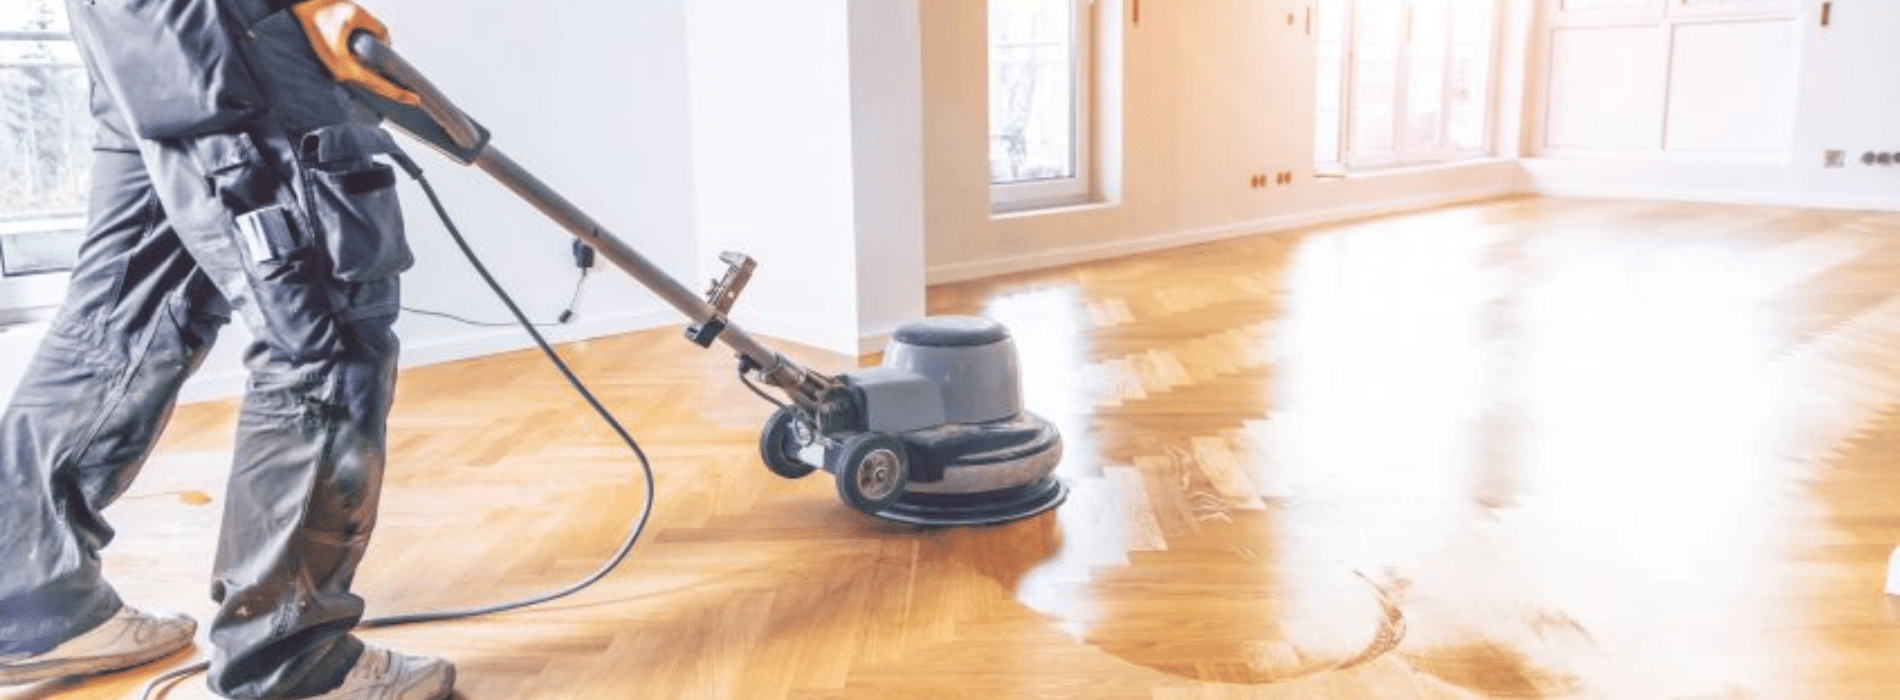 In Brick Lane, E1, Efficient herringbone floor sanding by Mr Sander® using Bona buffer sander (Effect 2200, Voltage 230, Frequency 50/60) and HEPA-filtered dust extraction. Experience the clean and flawless result on your 250x750 mm floor.